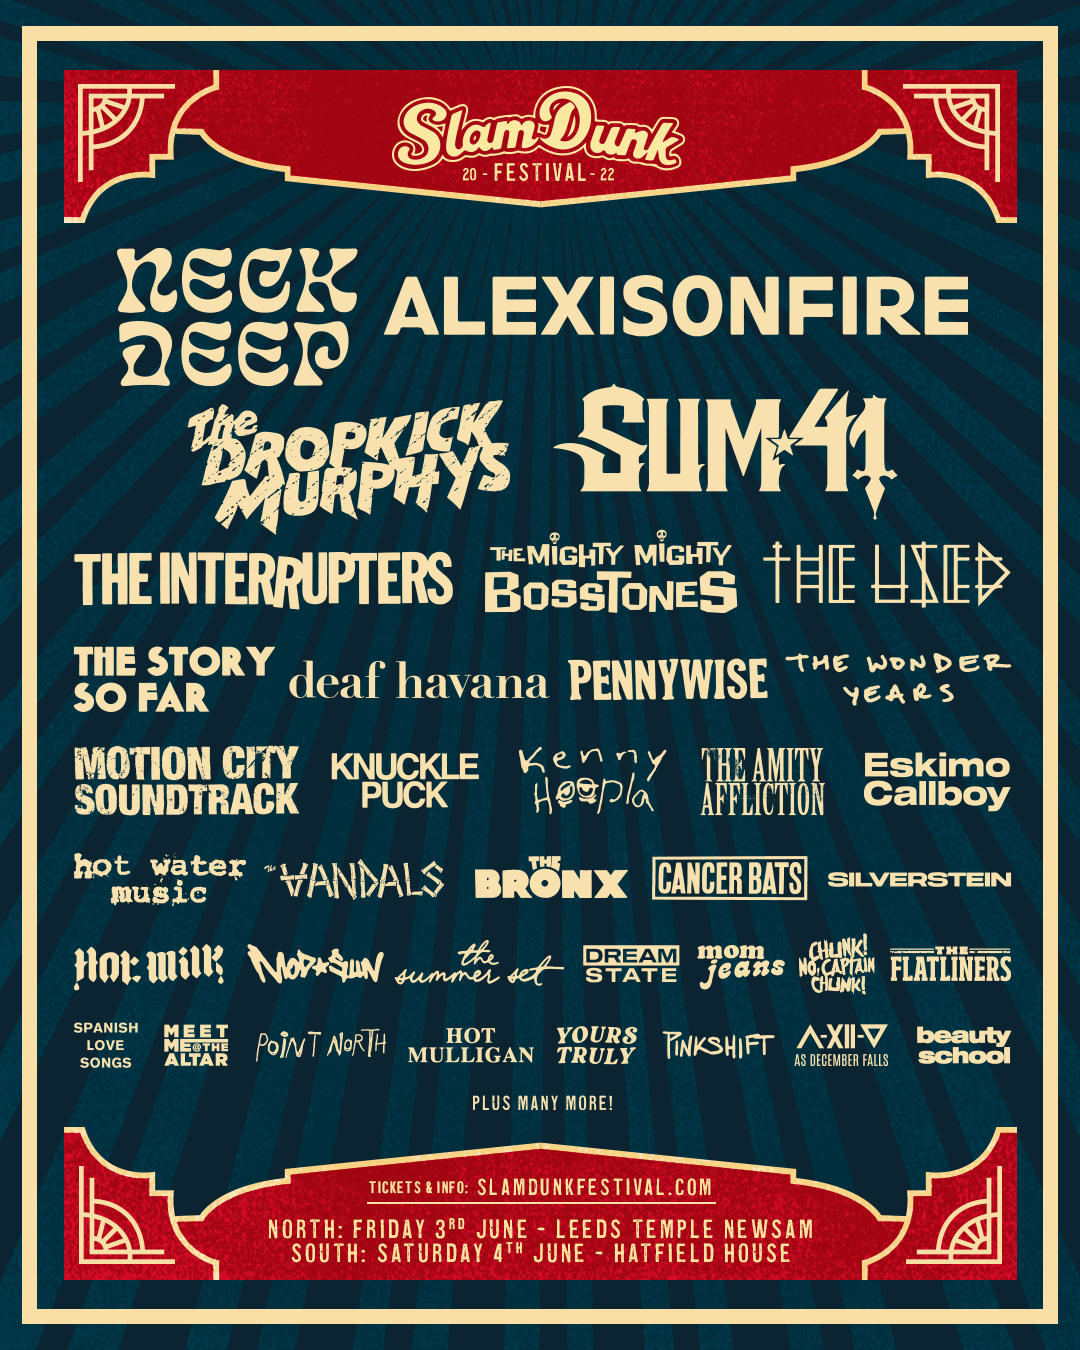 SUM 41, Act, Line-Up